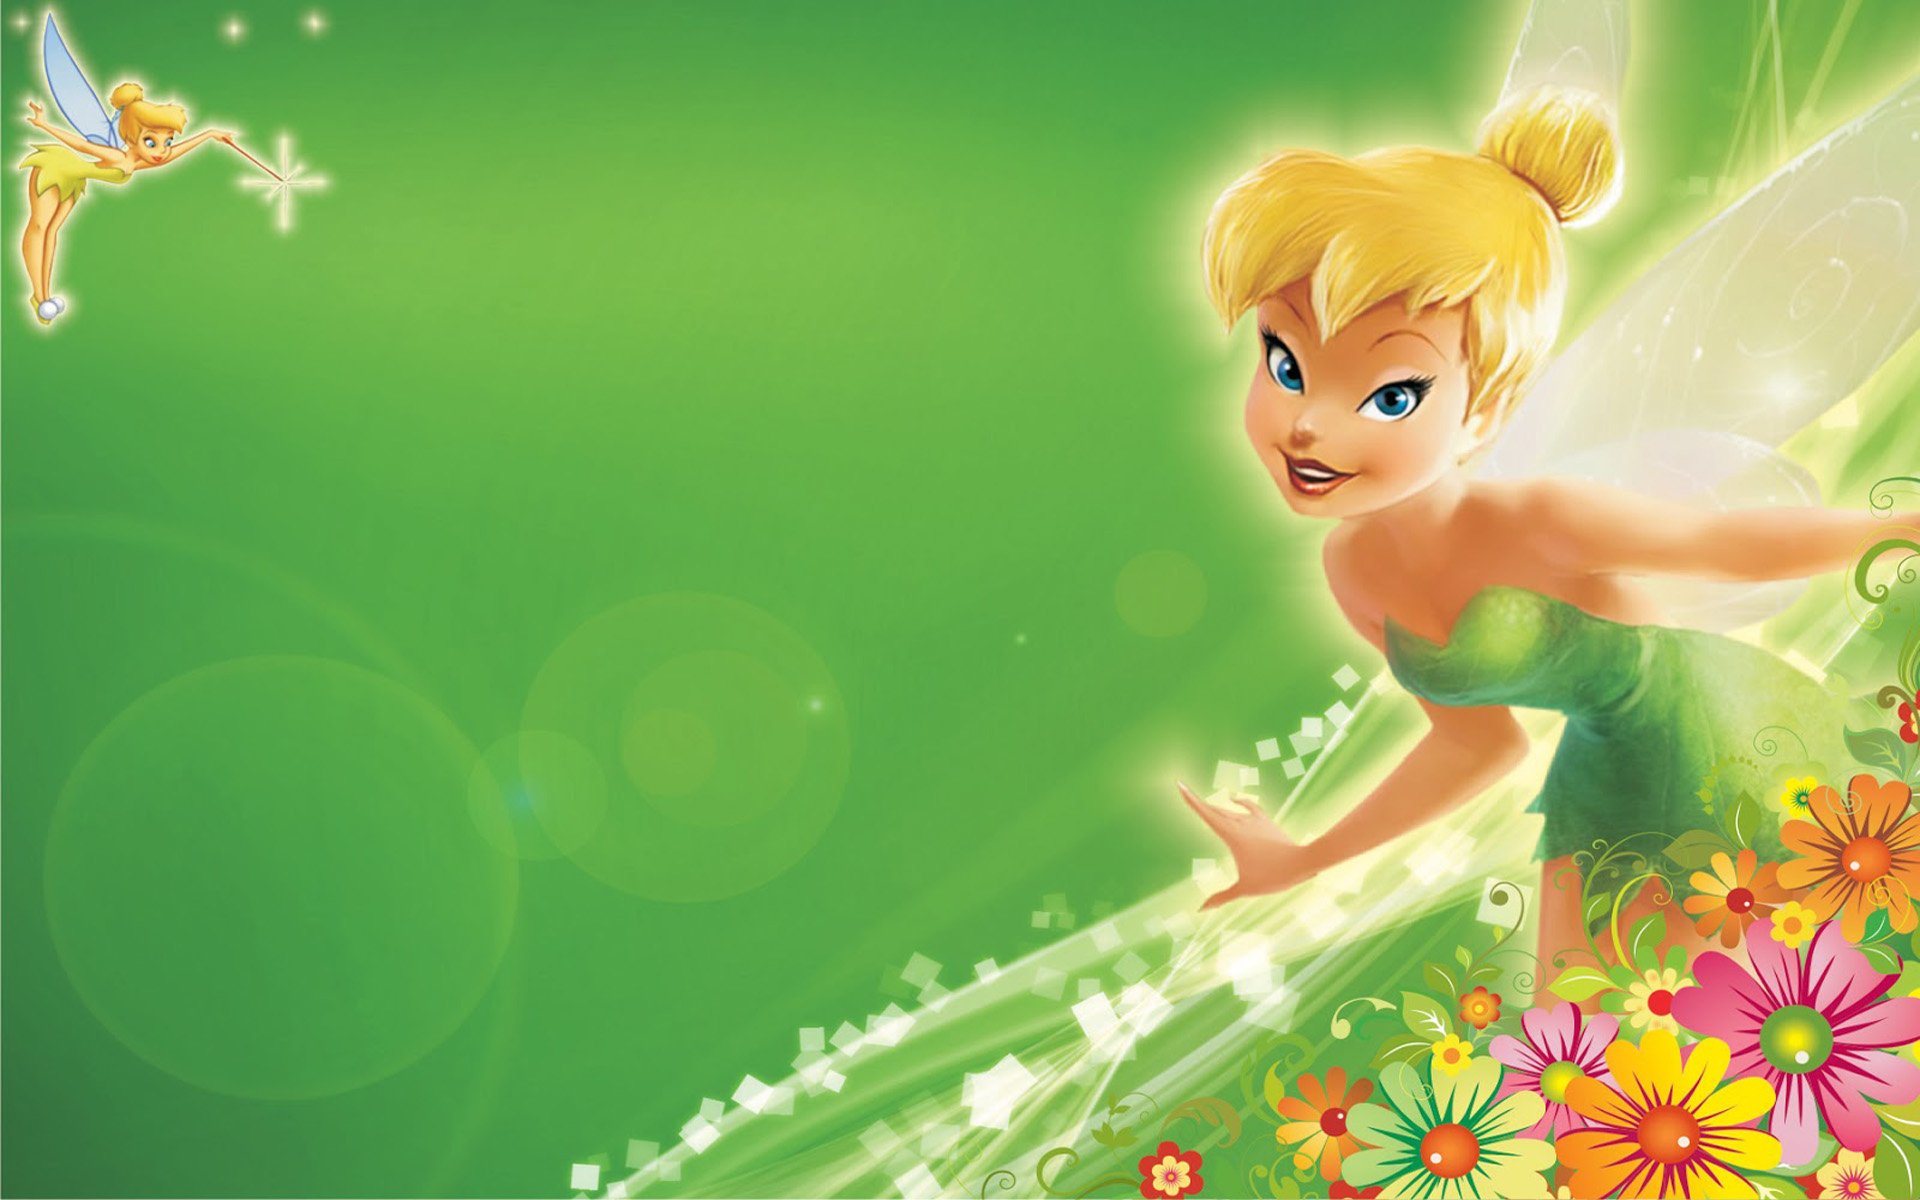 Tinkerbell Green HD Wallpapers with Flower Decoration for Mobile Phones Tablet and PC 1920x1200